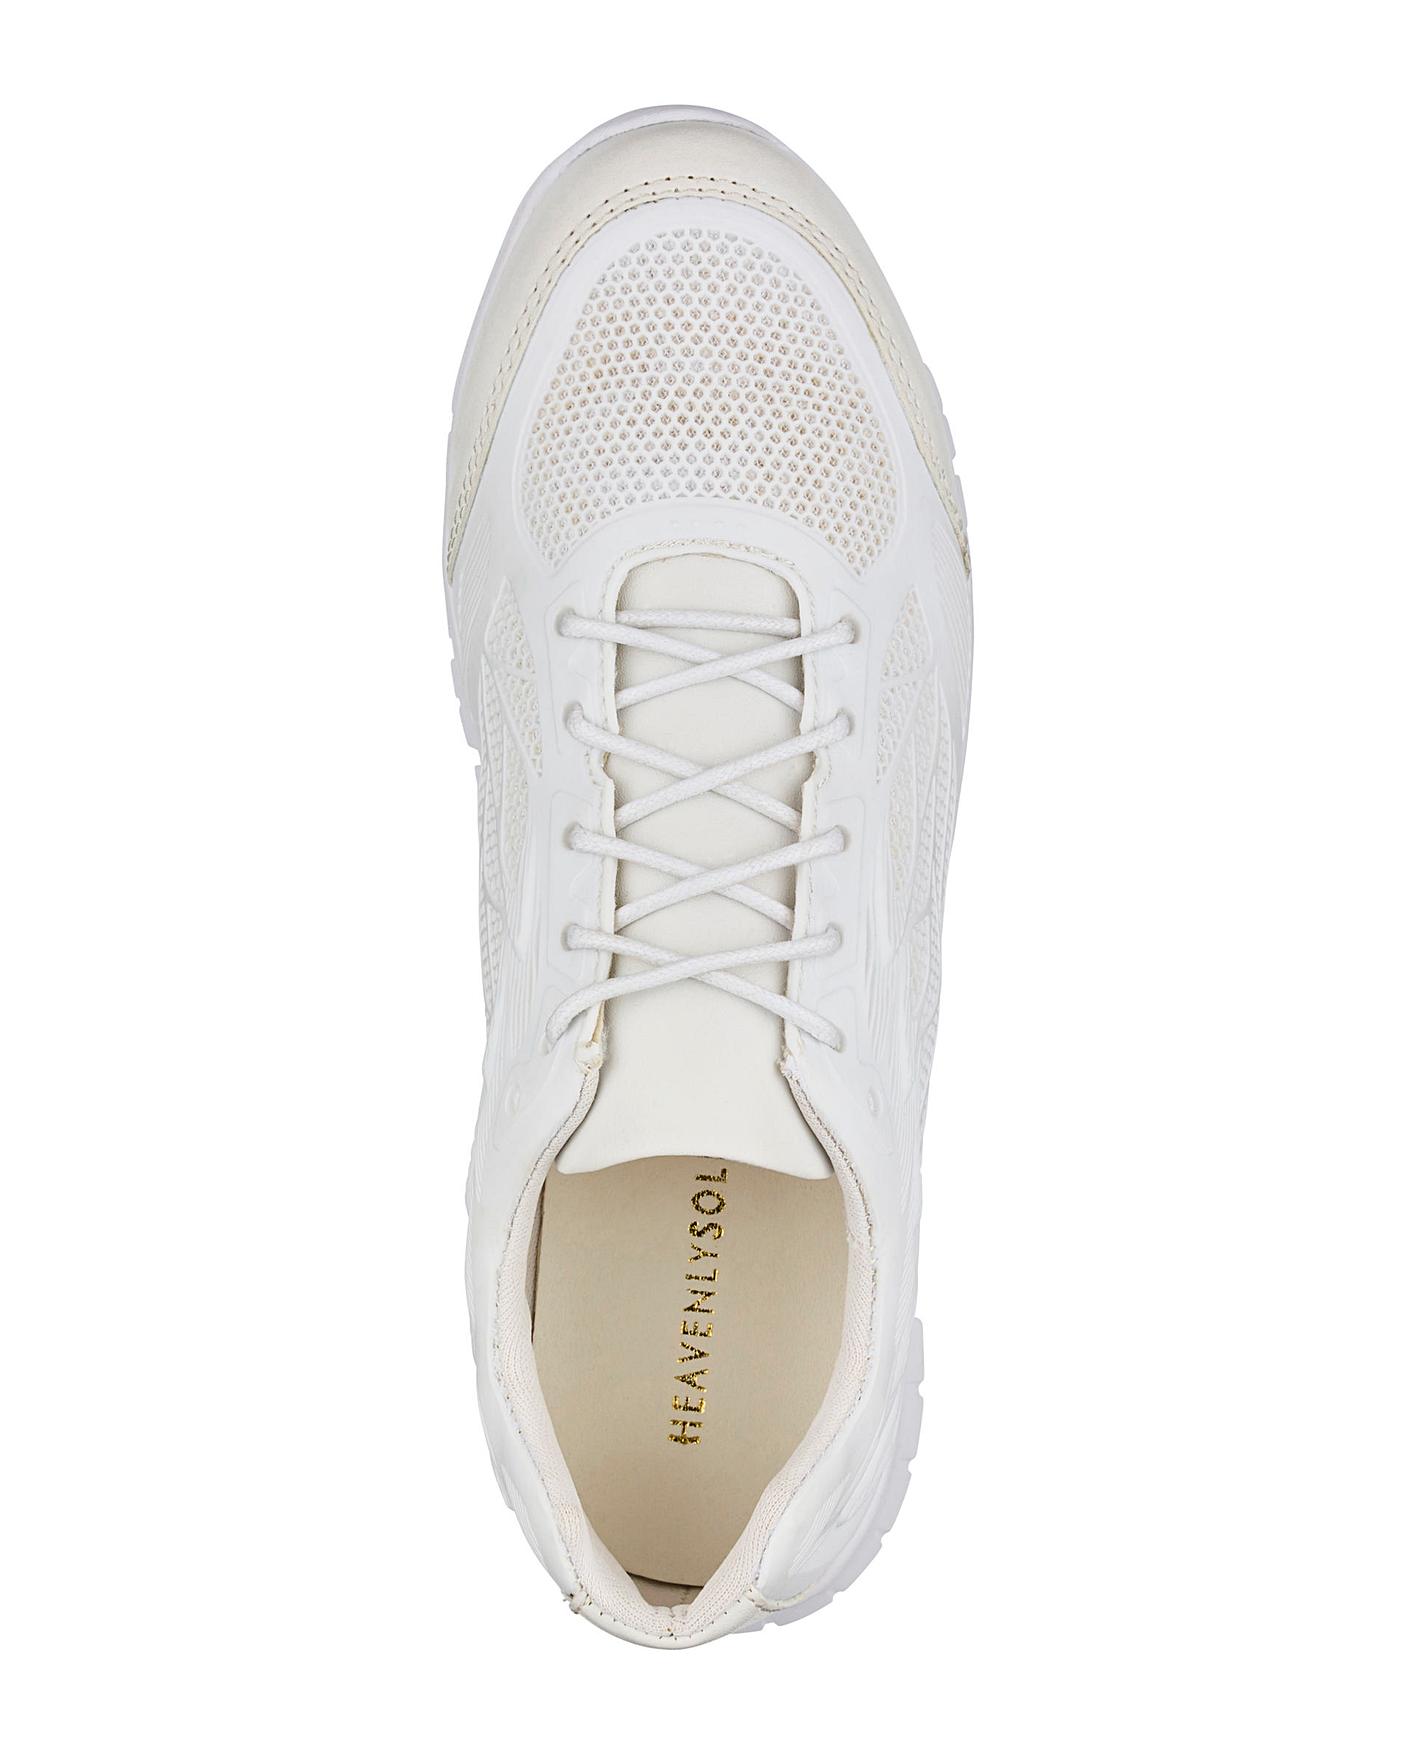 Heavenly Soles Leisure Shoes EEE Fit | House of Bath